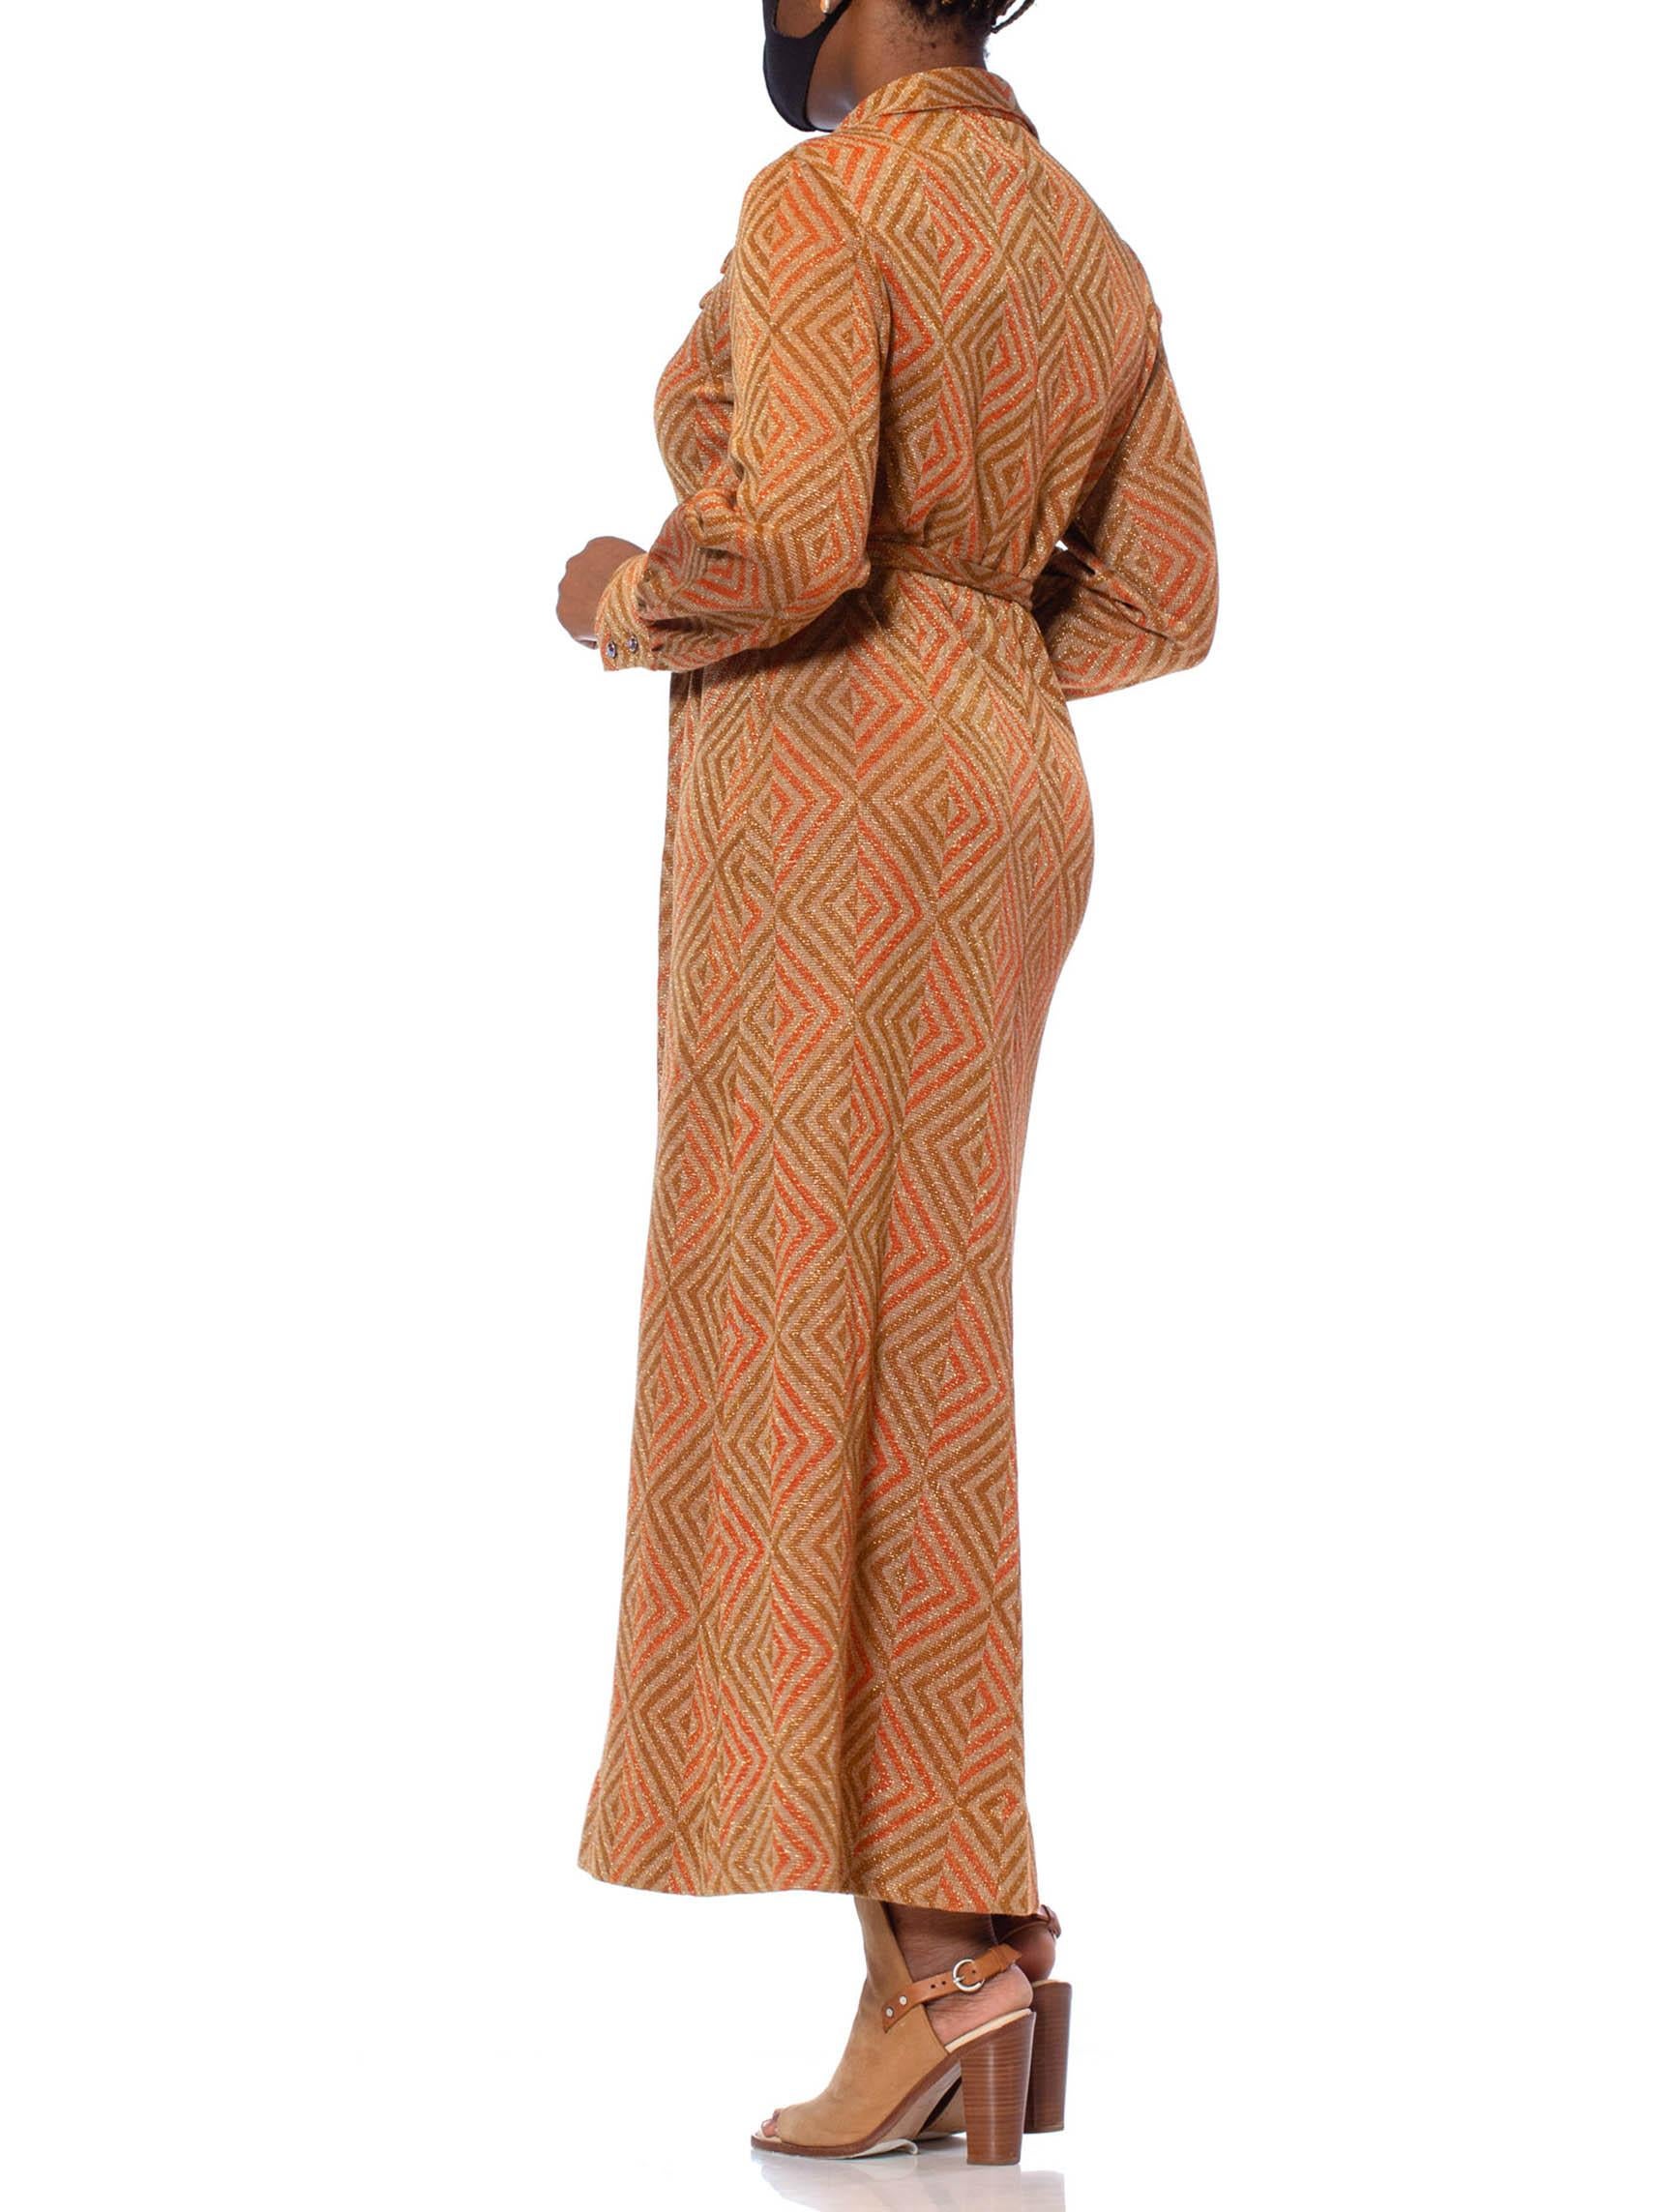 1970S Cinnamon Brown & Orange Poly/Lurex Double Knit Long Sleeved Maxi Cocktail 3